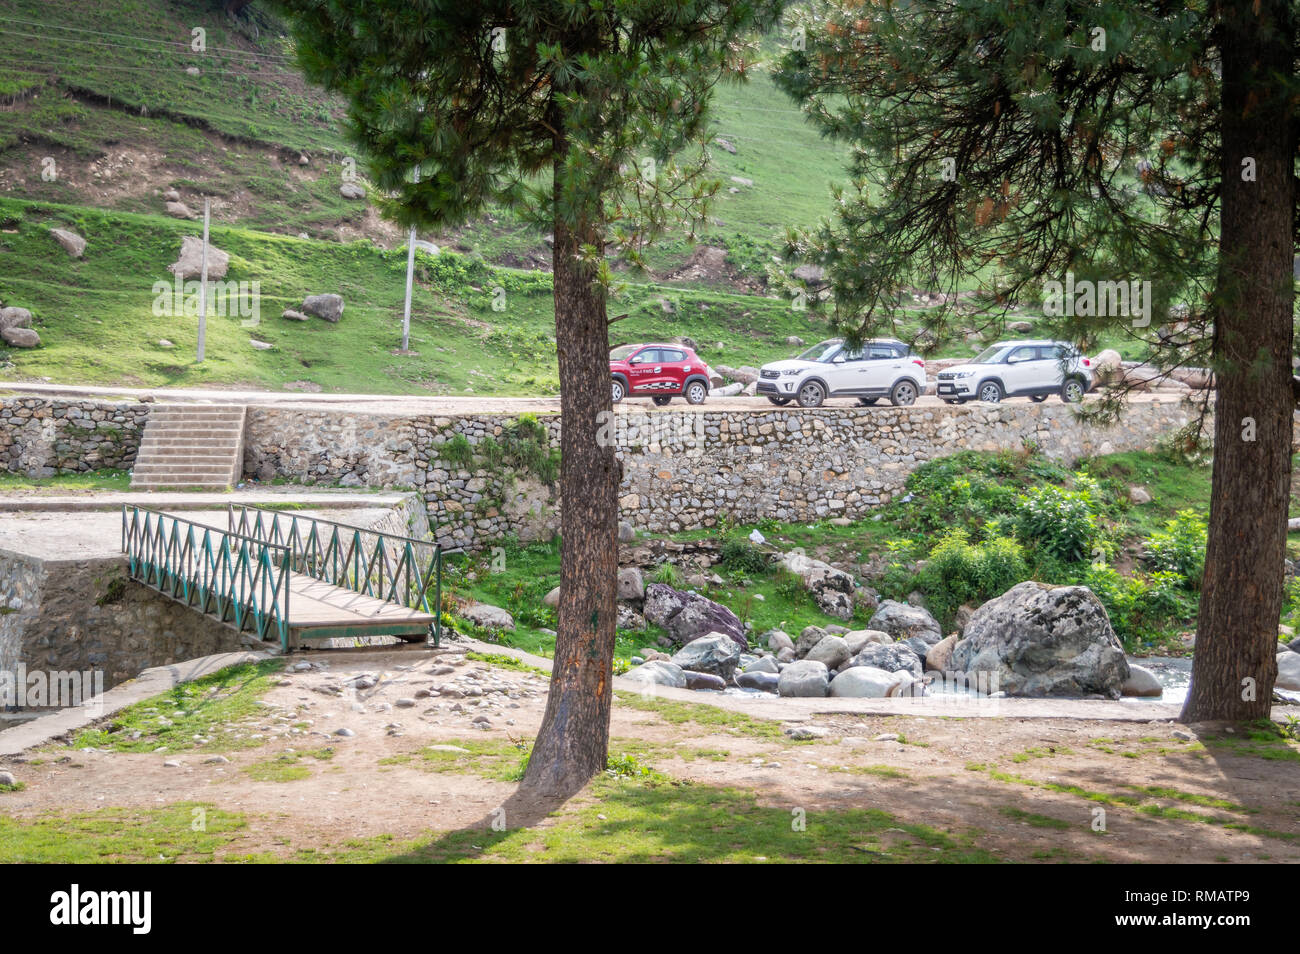 Aru, Jammu & Kashmir, India: Dated- August 20, 2018: Two SUV cars parked in a health resort full of greens Stock Photo